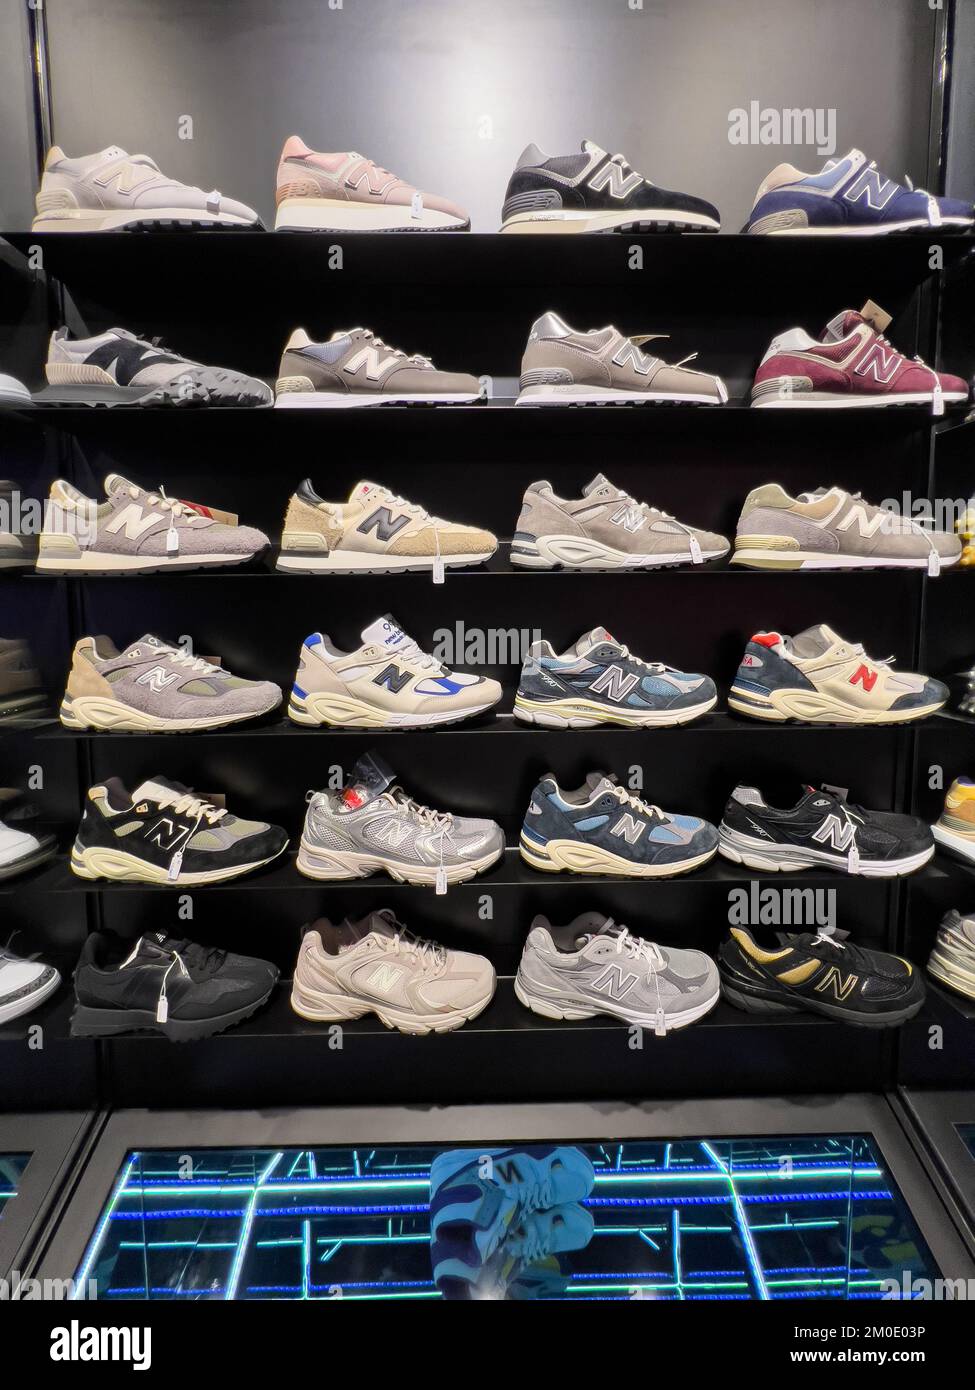 Cool shelves display of New Balance sneakers for customer's selection Stock Photo